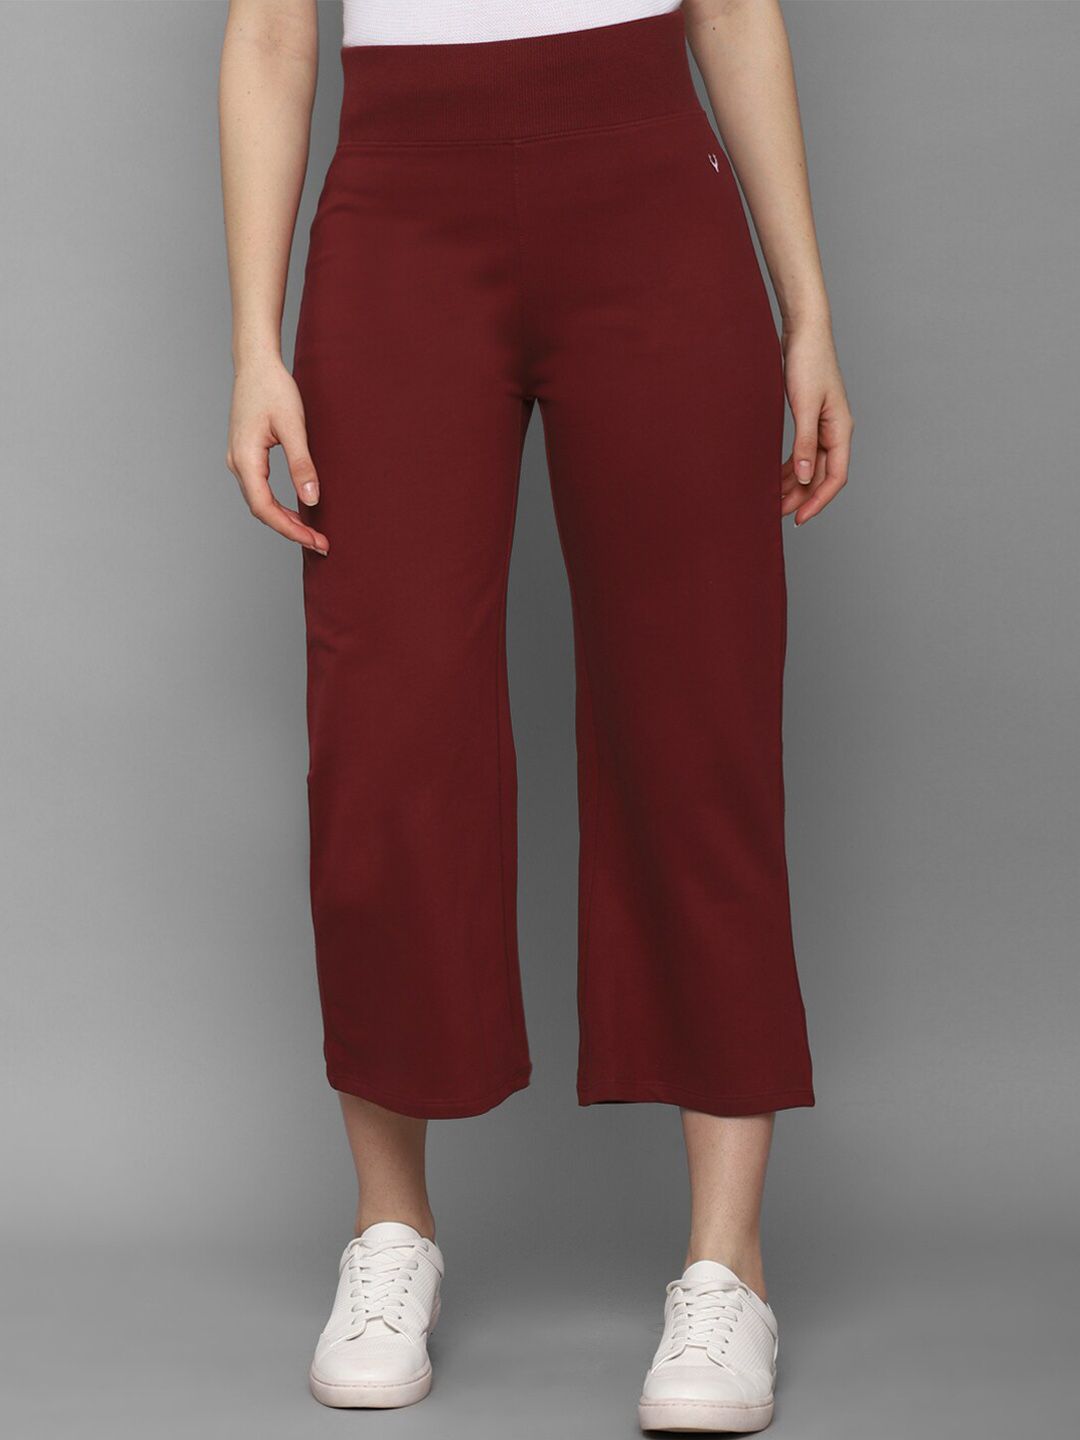 Allen Solly Woman Women Maroon Solid Culottes Trousers Price in India